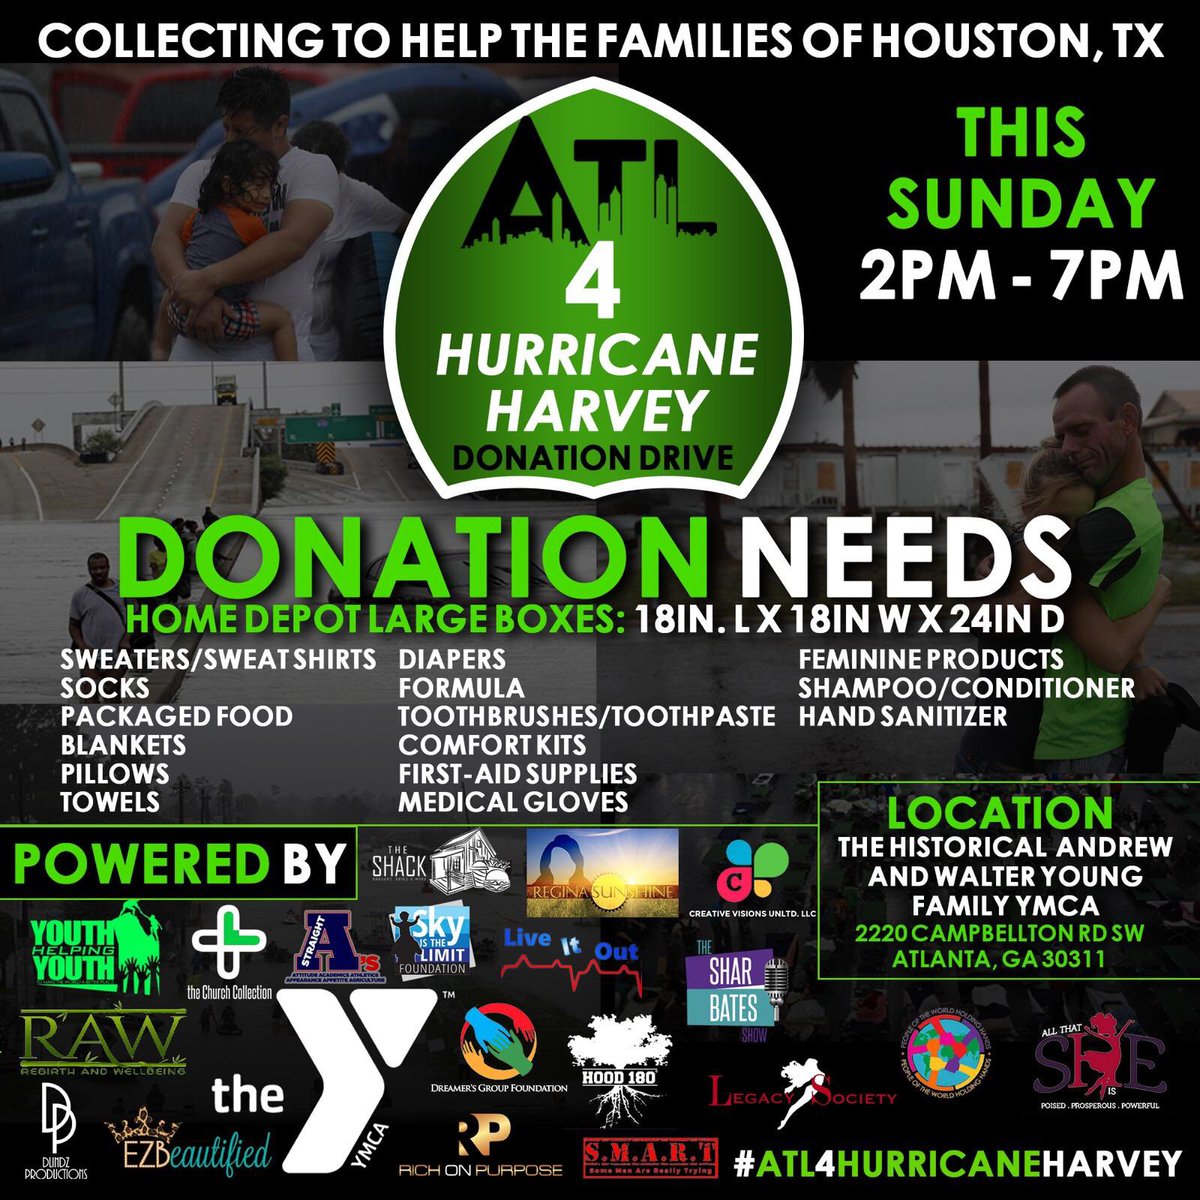 If you're in Atlanta & want to help #HurricaneHarvey victims, come out today w/ @yhyworldwide ???????? https://t.co/0gMrTEvGXk